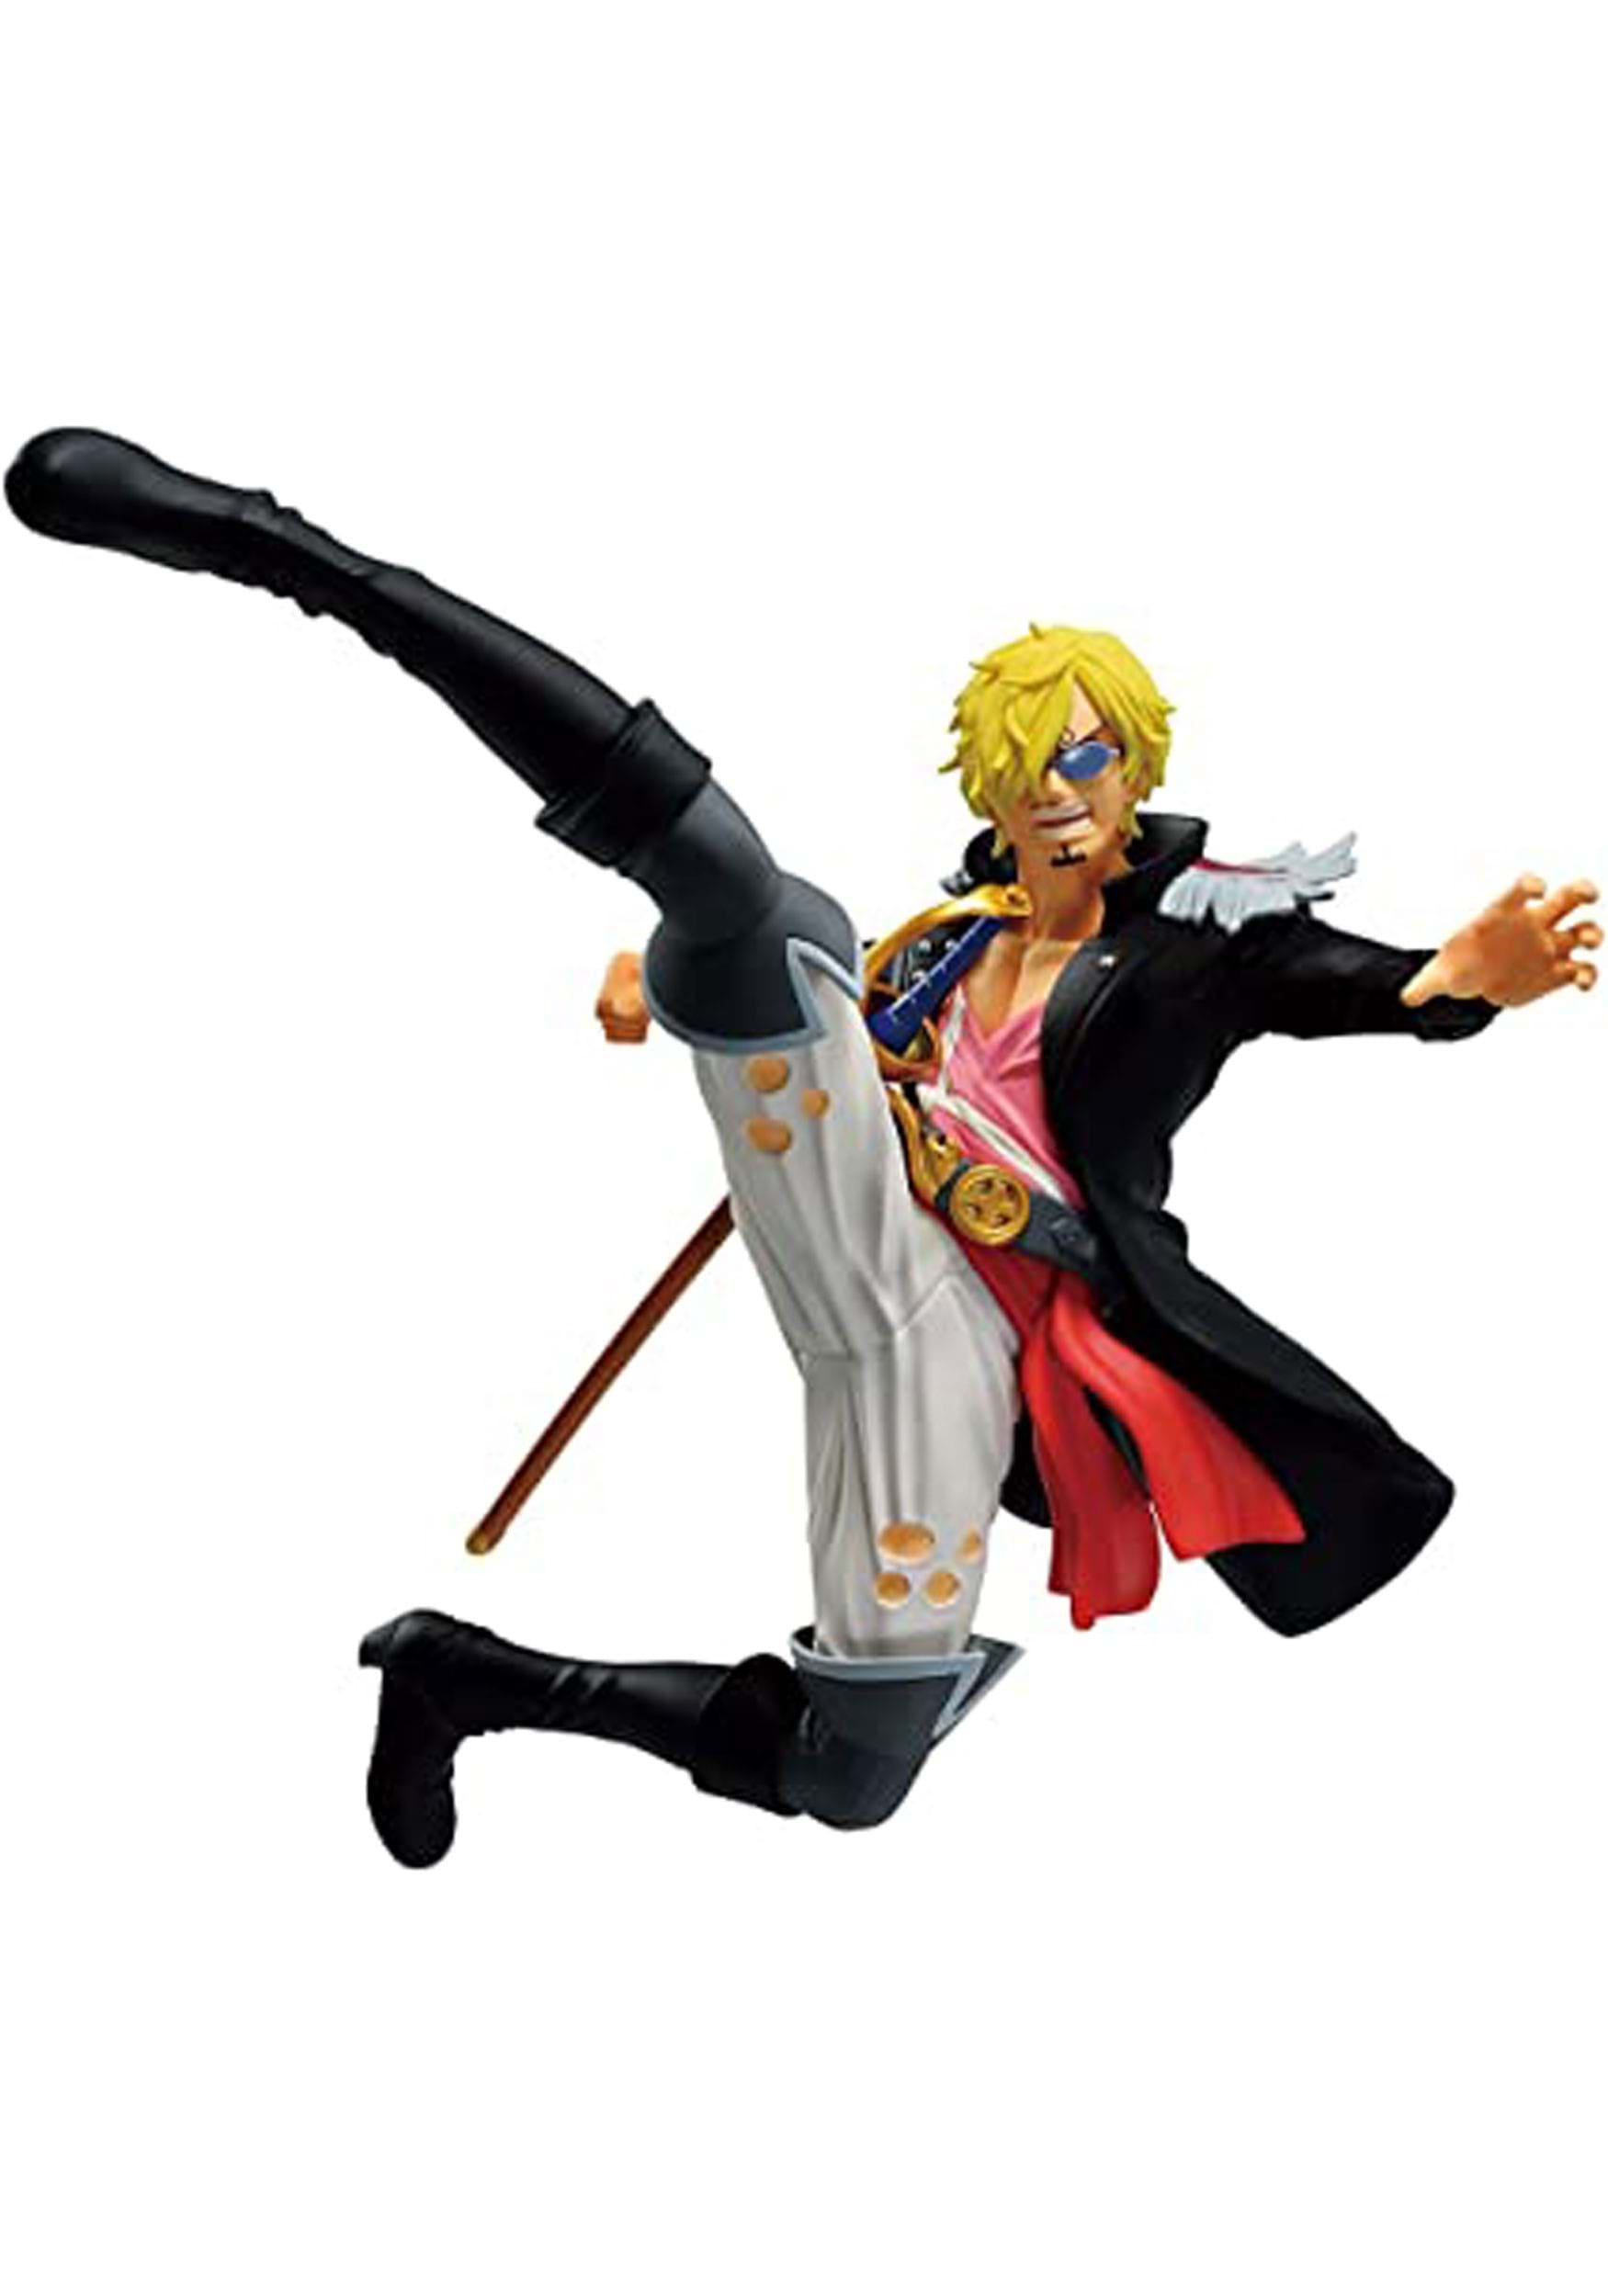 https://images.fun.com/products/87453/1-1/one-piece-red-sanji-figure.jpg